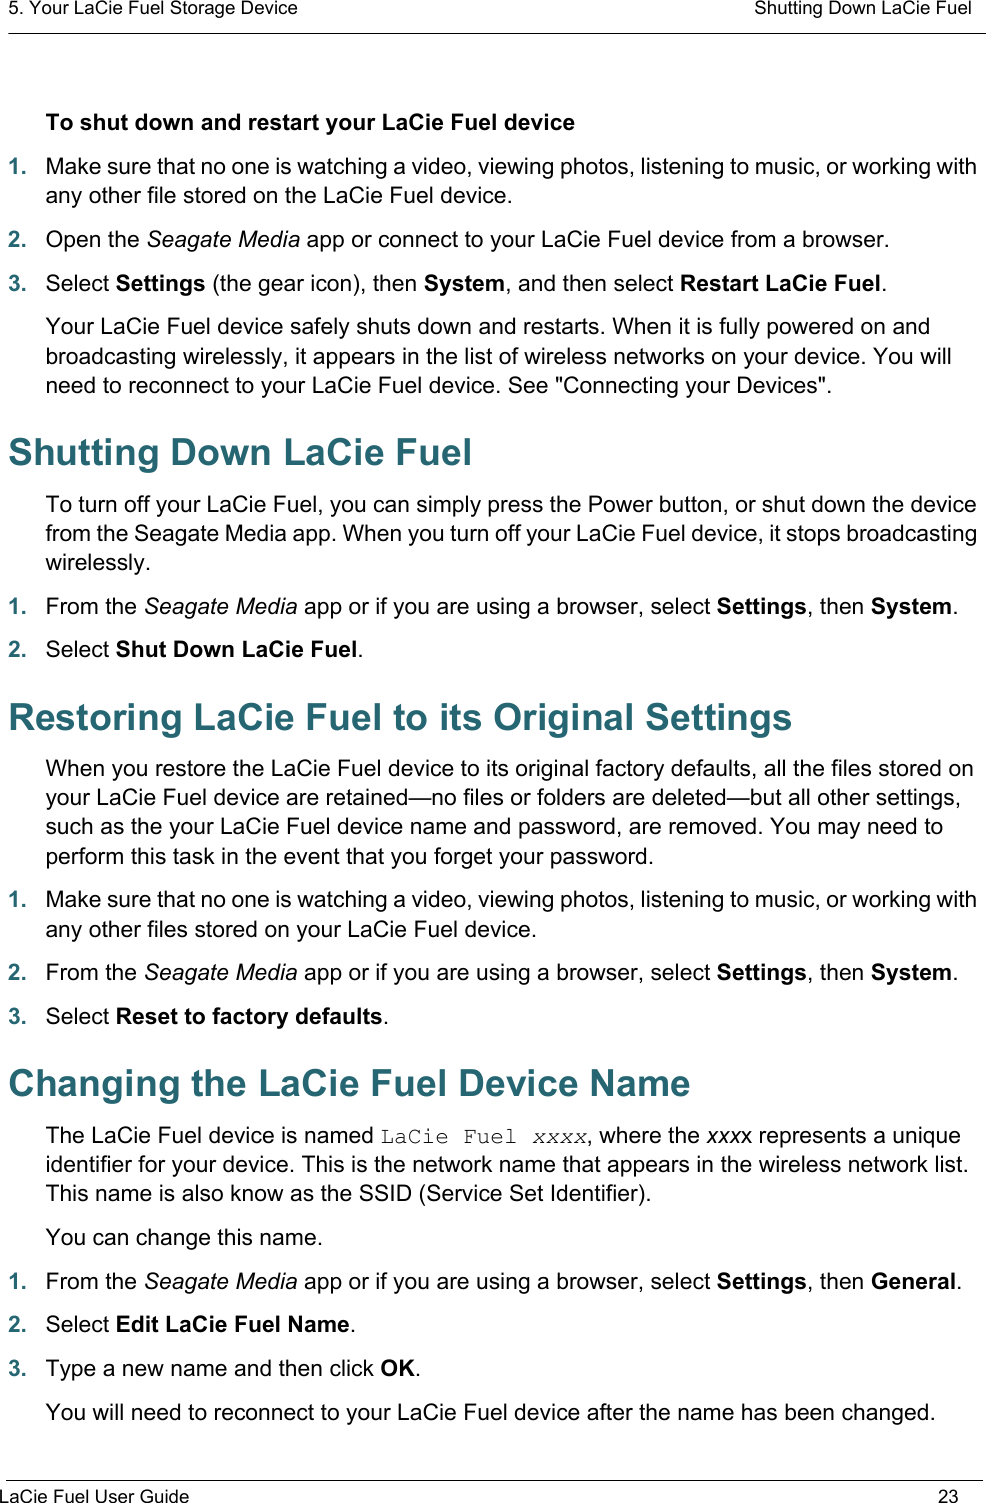 5. Your LaCie Fuel Storage Device  Shutting Down LaCie FuelLaCie Fuel User Guide 23To shut down and restart your LaCie Fuel device1. Make sure that no one is watching a video, viewing photos, listening to music, or working with any other file stored on the LaCie Fuel device.2. Open the Seagate Media app or connect to your LaCie Fuel device from a browser.3. Select Settings (the gear icon), then System, and then select Restart LaCie Fuel.Your LaCie Fuel device safely shuts down and restarts. When it is fully powered on and broadcasting wirelessly, it appears in the list of wireless networks on your device. You will need to reconnect to your LaCie Fuel device. See &quot;Connecting your Devices&quot;.Shutting Down LaCie Fuel To turn off your LaCie Fuel, you can simply press the Power button, or shut down the device from the Seagate Media app. When you turn off your LaCie Fuel device, it stops broadcasting wirelessly.1. From the Seagate Media app or if you are using a browser, select Settings, then System.2. Select Shut Down LaCie Fuel.Restoring LaCie Fuel to its Original SettingsWhen you restore the LaCie Fuel device to its original factory defaults, all the files stored on your LaCie Fuel device are retained—no files or folders are deleted—but all other settings, such as the your LaCie Fuel device name and password, are removed. You may need to perform this task in the event that you forget your password.1. Make sure that no one is watching a video, viewing photos, listening to music, or working with any other files stored on your LaCie Fuel device.2. From the Seagate Media app or if you are using a browser, select Settings, then System.3. Select Reset to factory defaults.Changing the LaCie Fuel Device NameThe LaCie Fuel device is named LaCie Fuel xxxx, where the xxxx represents a unique identifier for your device. This is the network name that appears in the wireless network list. This name is also know as the SSID (Service Set Identifier).You can change this name.1. From the Seagate Media app or if you are using a browser, select Settings, then General.2. Select Edit LaCie Fuel Name.3. Type a new name and then click OK.You will need to reconnect to your LaCie Fuel device after the name has been changed.